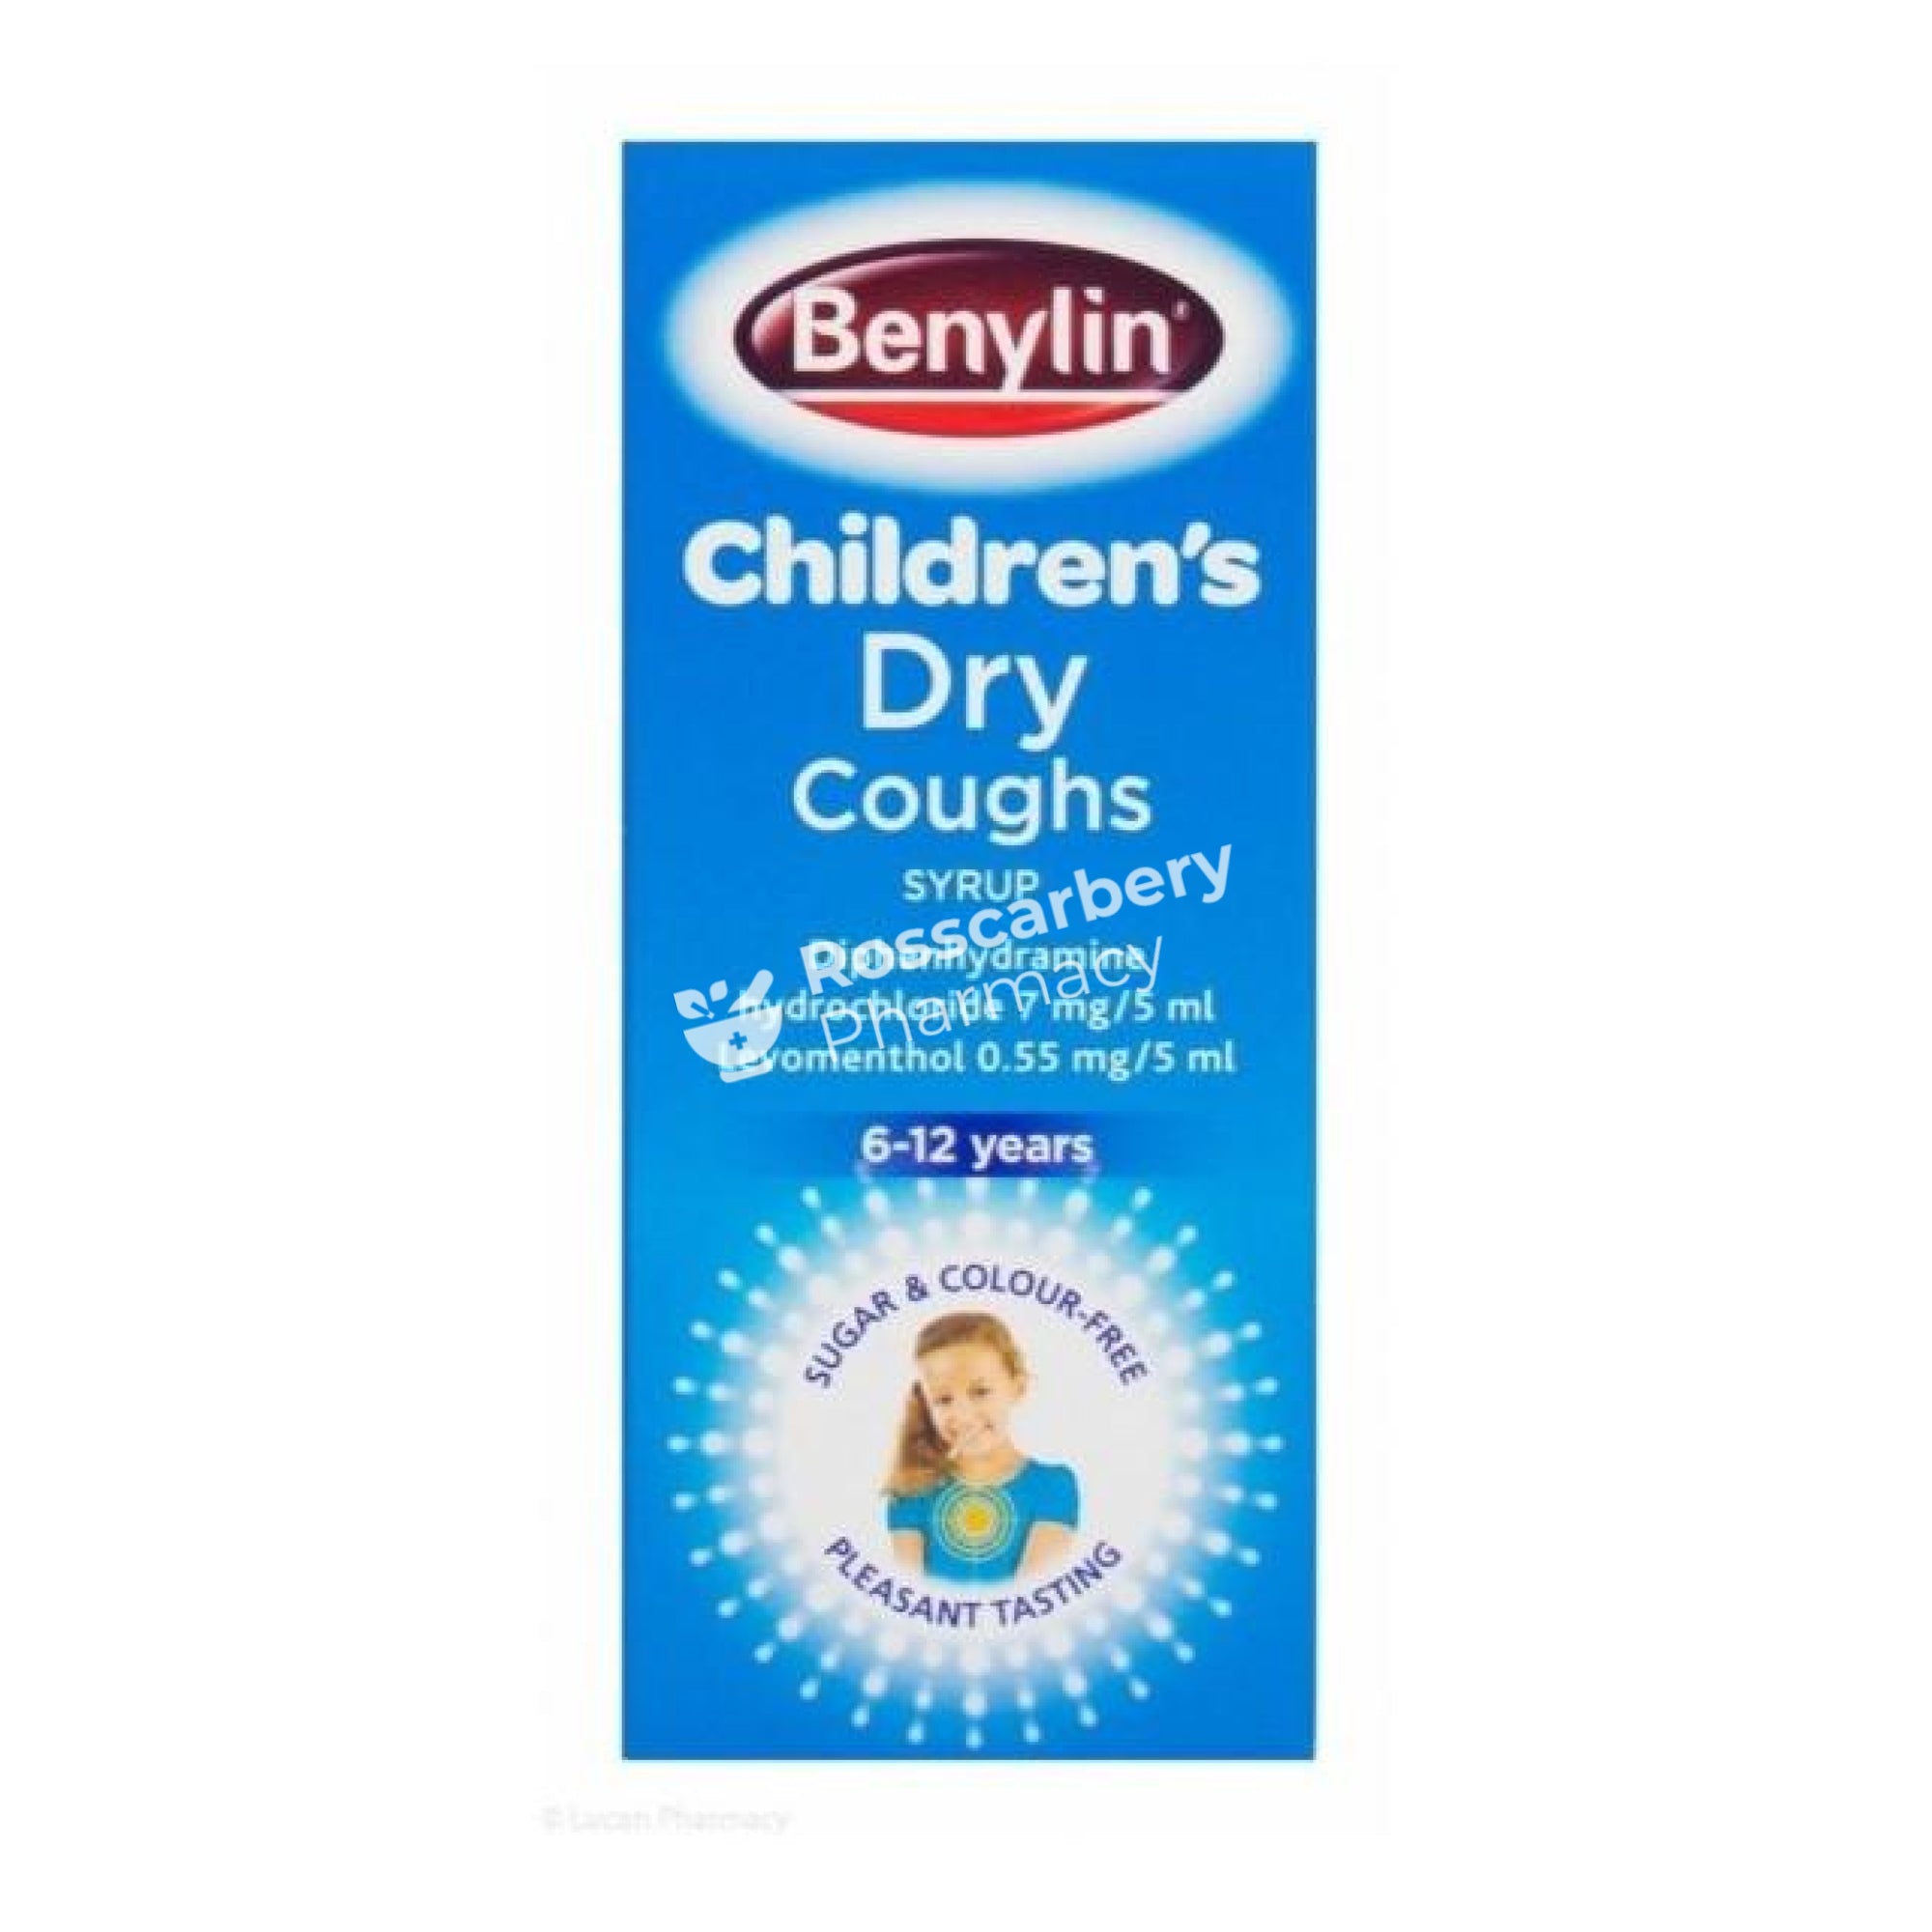 Benylin Childrens Dry Cough Syrup Bottles